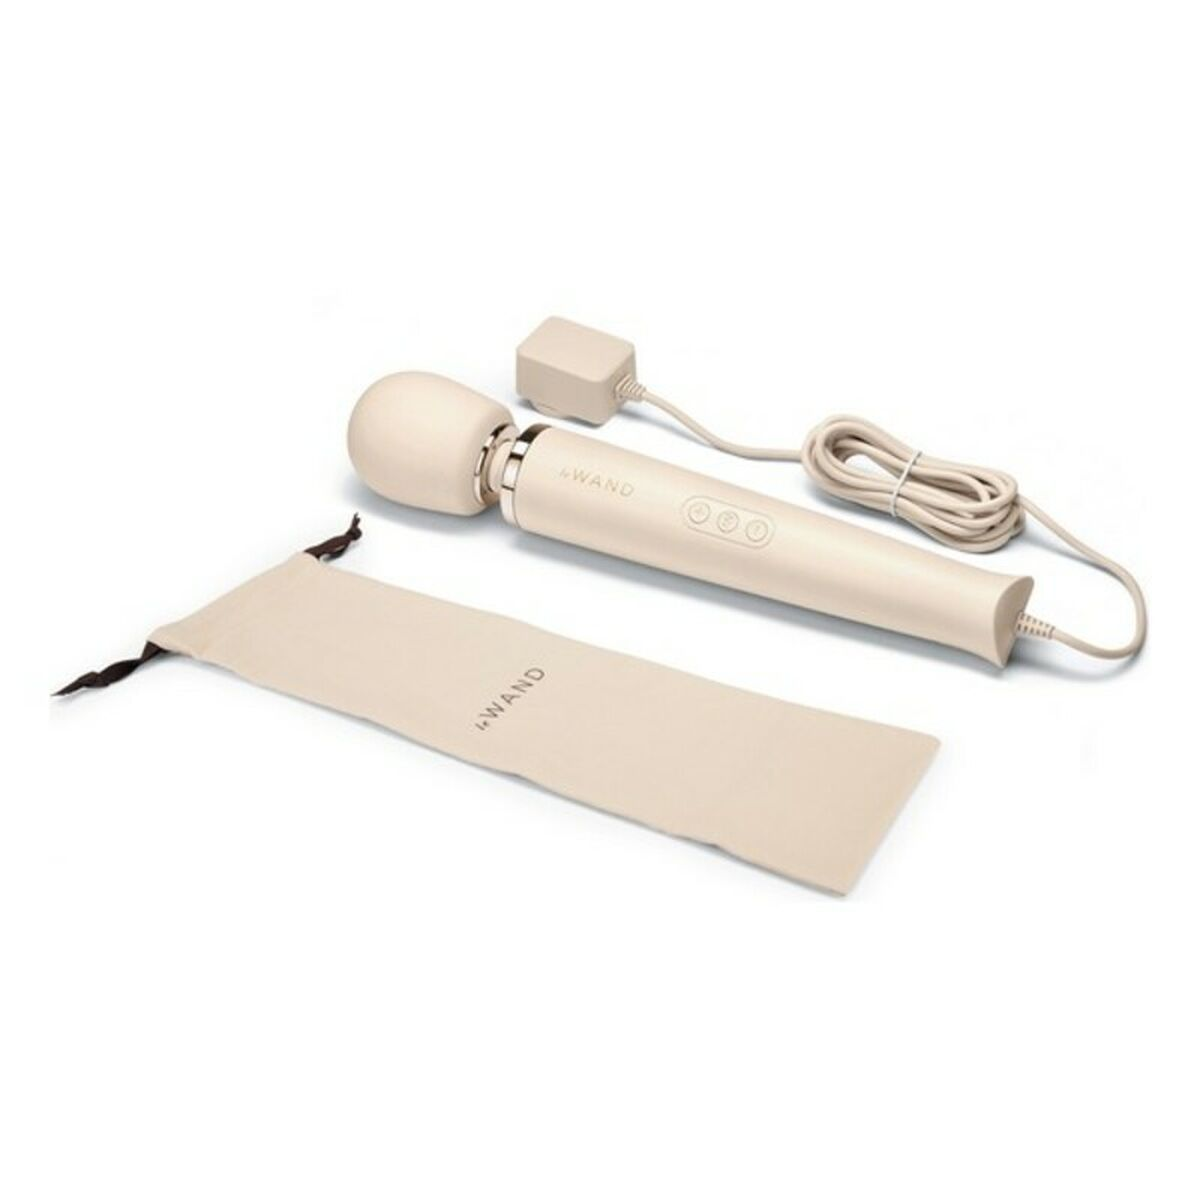 LE WAND Powerful Plug-In Vibrating Vibrator Massager